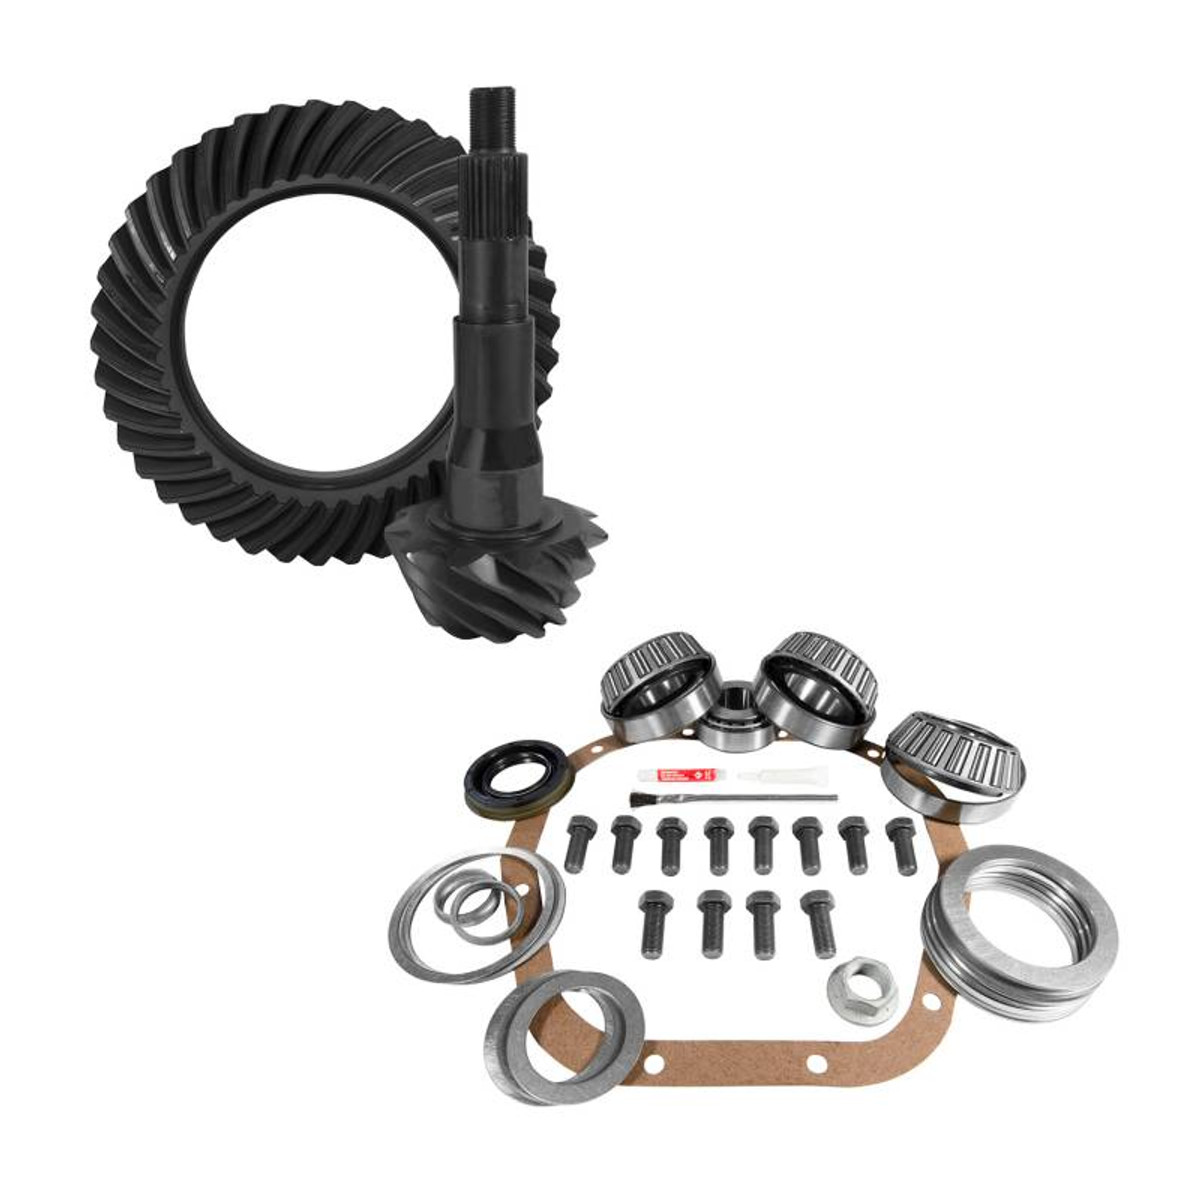 10.5 inch Ford 3.73 Rear Ring and Pinion Install Kit YGK2131